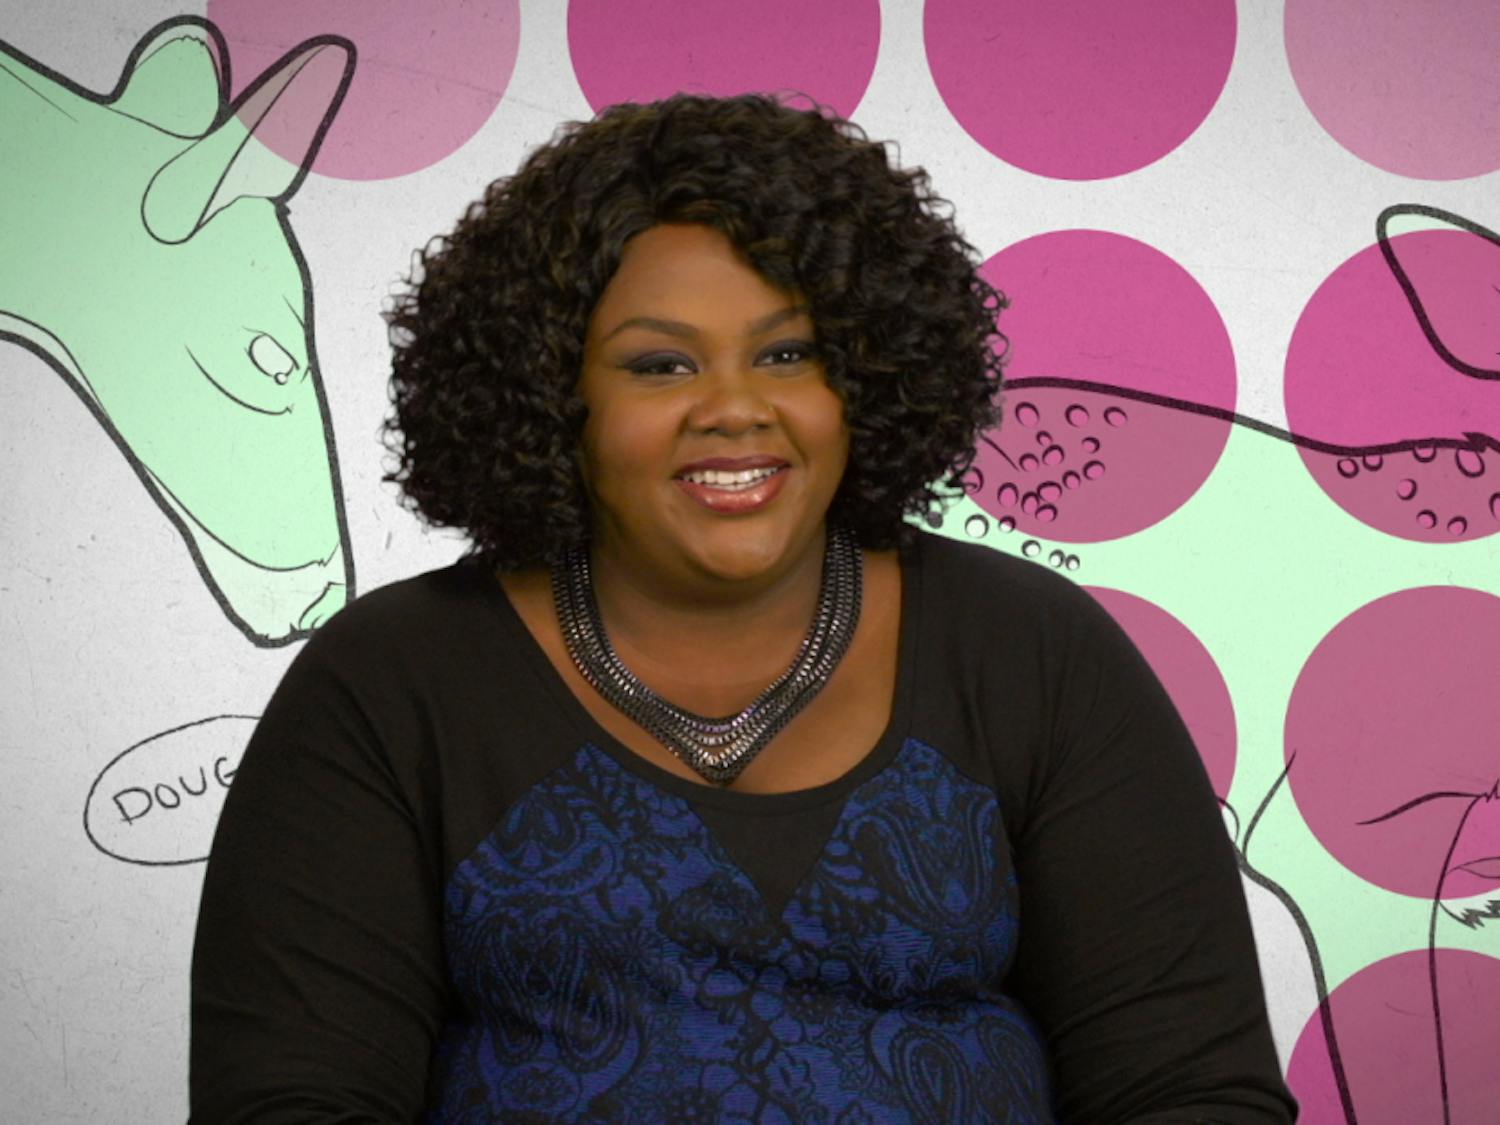 Nicole Byer of MTV’s “Girl Code” will be at the Reitz Union Grand Ballroom Friday at 9 p.m. as part of the all-female trio comedy improv group, Cat Ladies.